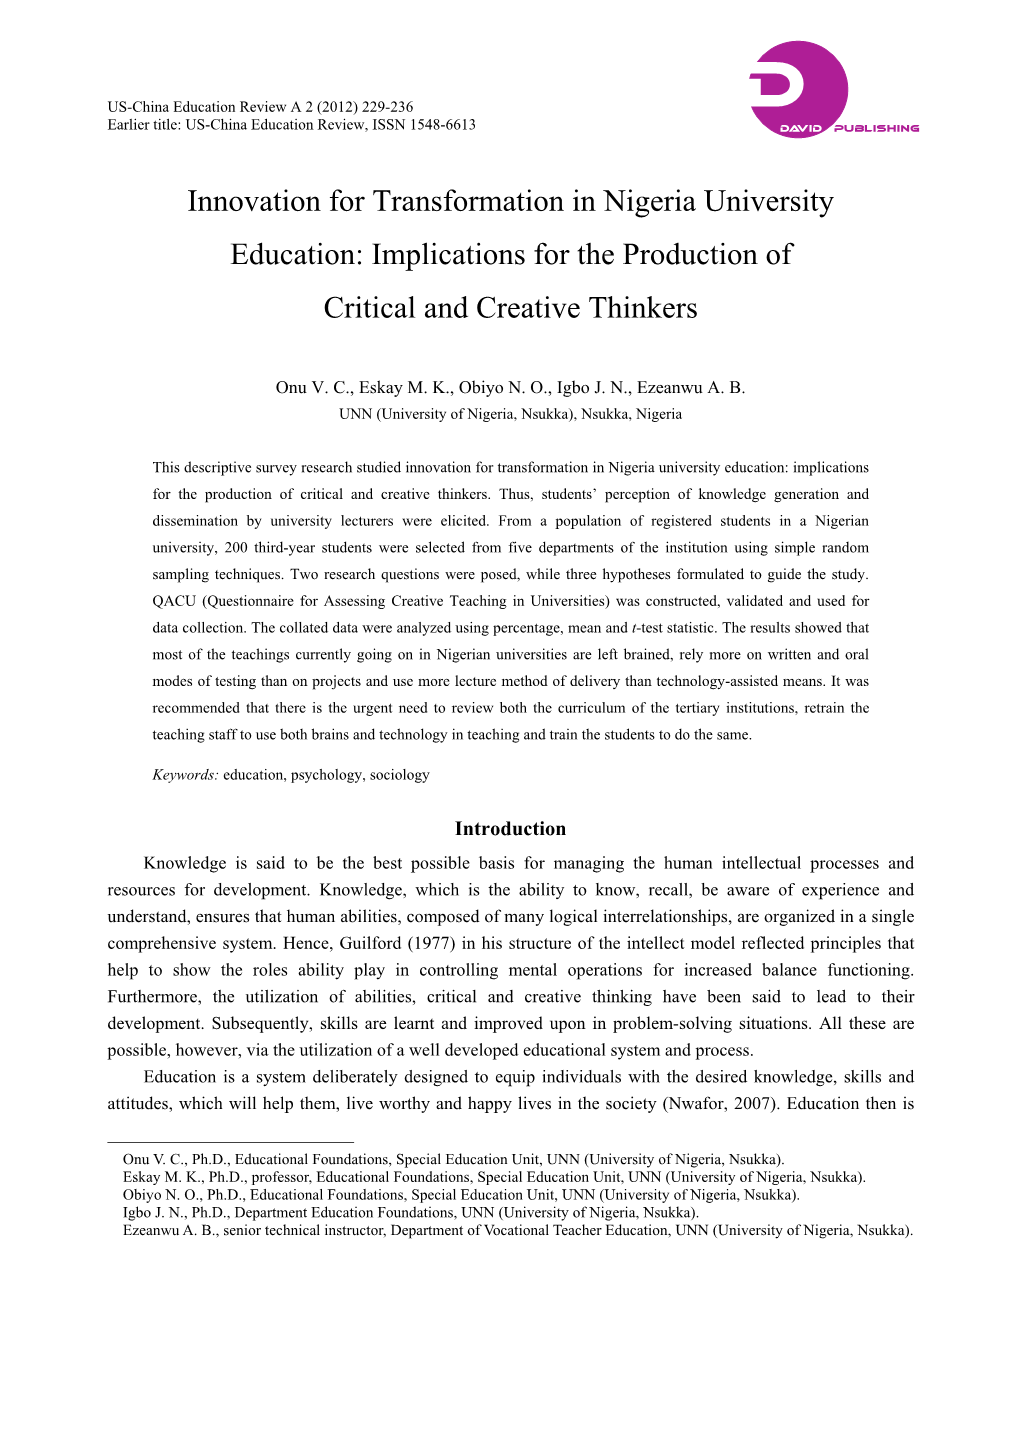 Innovation for Transformation in Nigeria University Education: Implications for the Production of Critical and Creative Thinkers